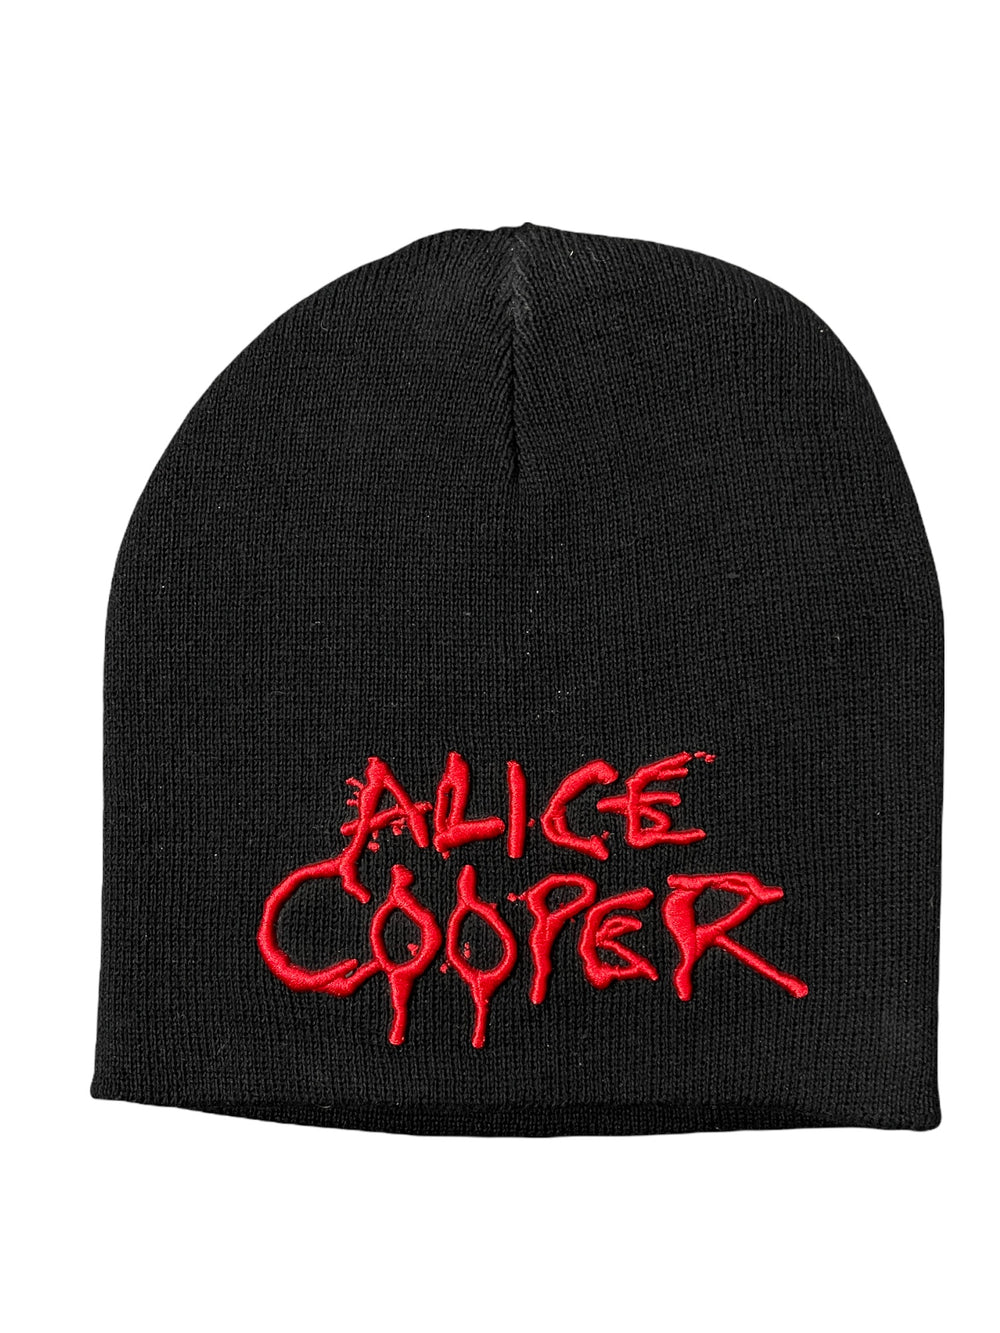 Alice Cooper - Logo Embroidery Official Beanie Hat One Size Fits All NEW